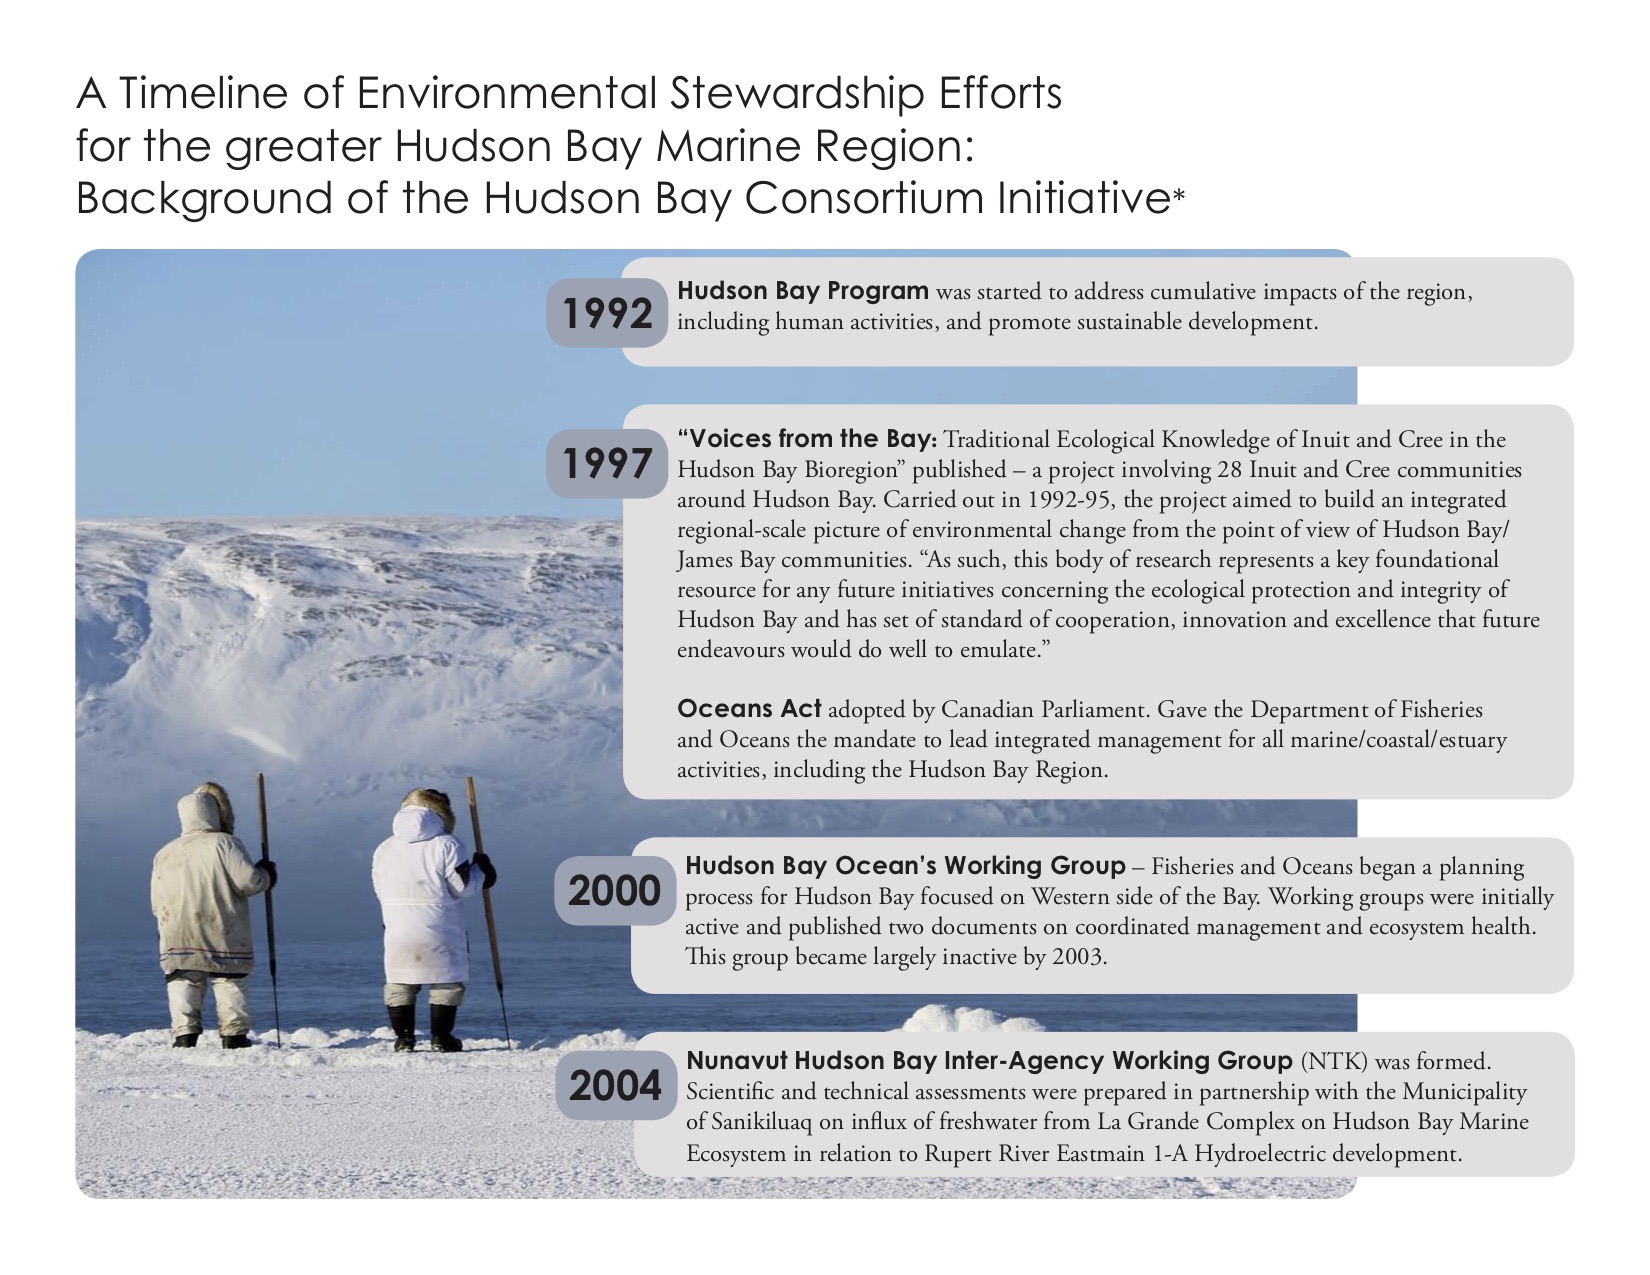 A Timeline of Environmental Stewardship Efforts  for the greater Hudson Bay Marine Region:  Background of the Hudson Bay Consortium Initiative